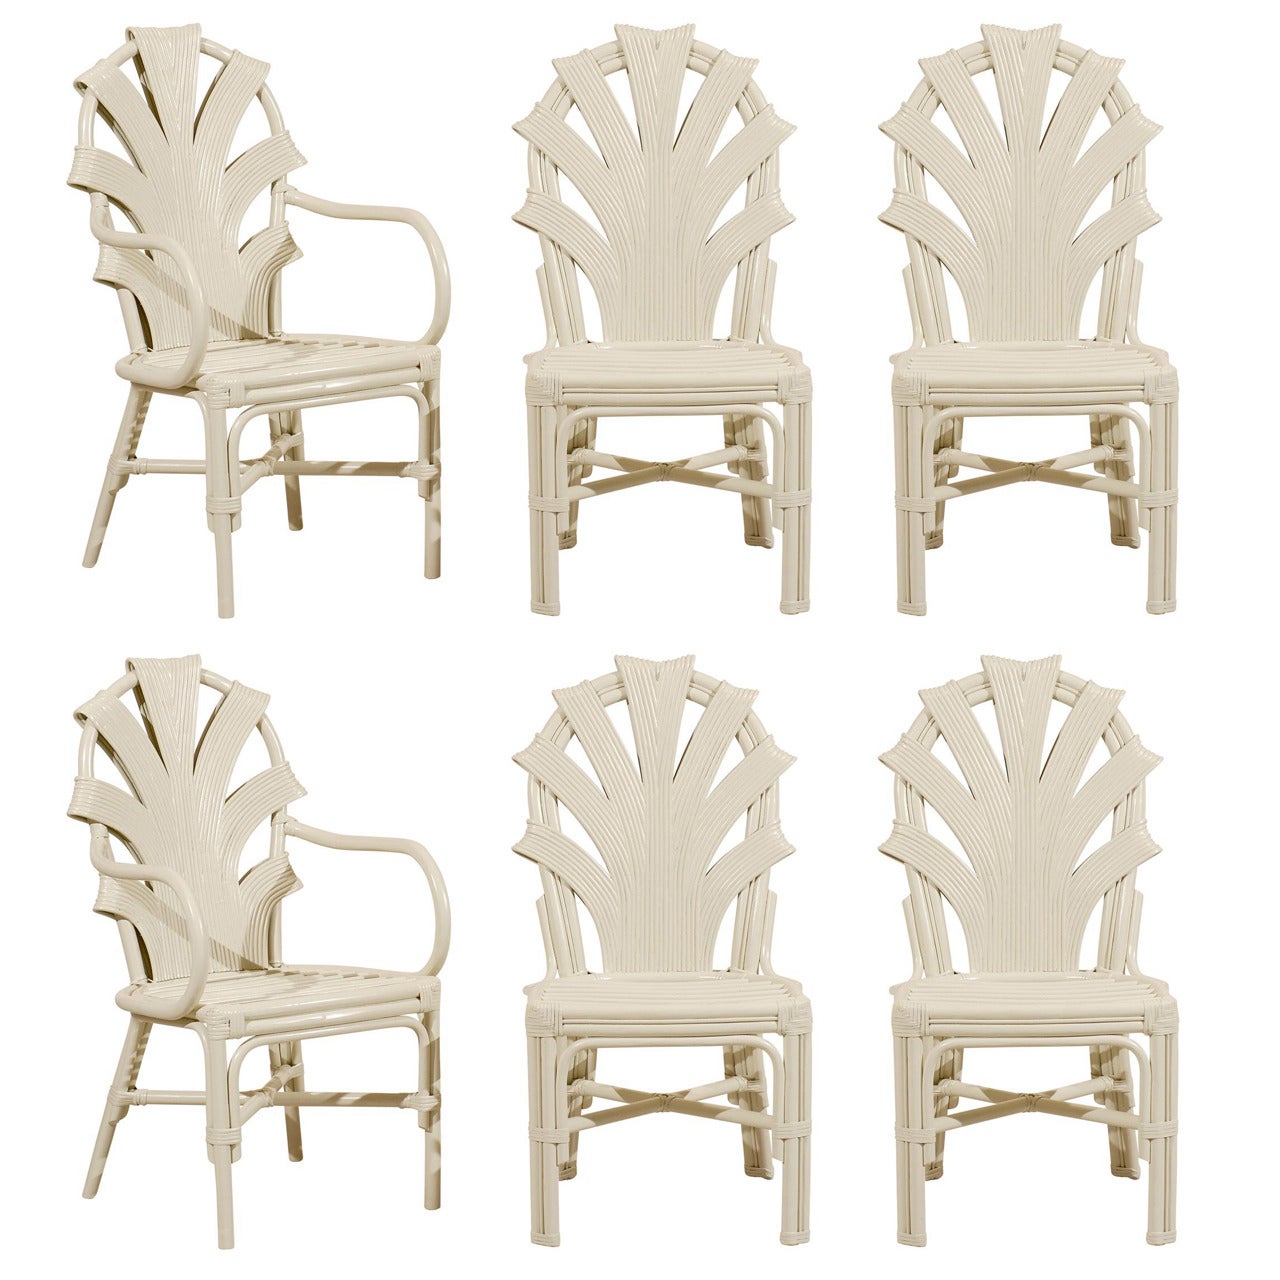 Exceptional Set of Six Vintage Rattan Dining Chairs in Cream Lacquer